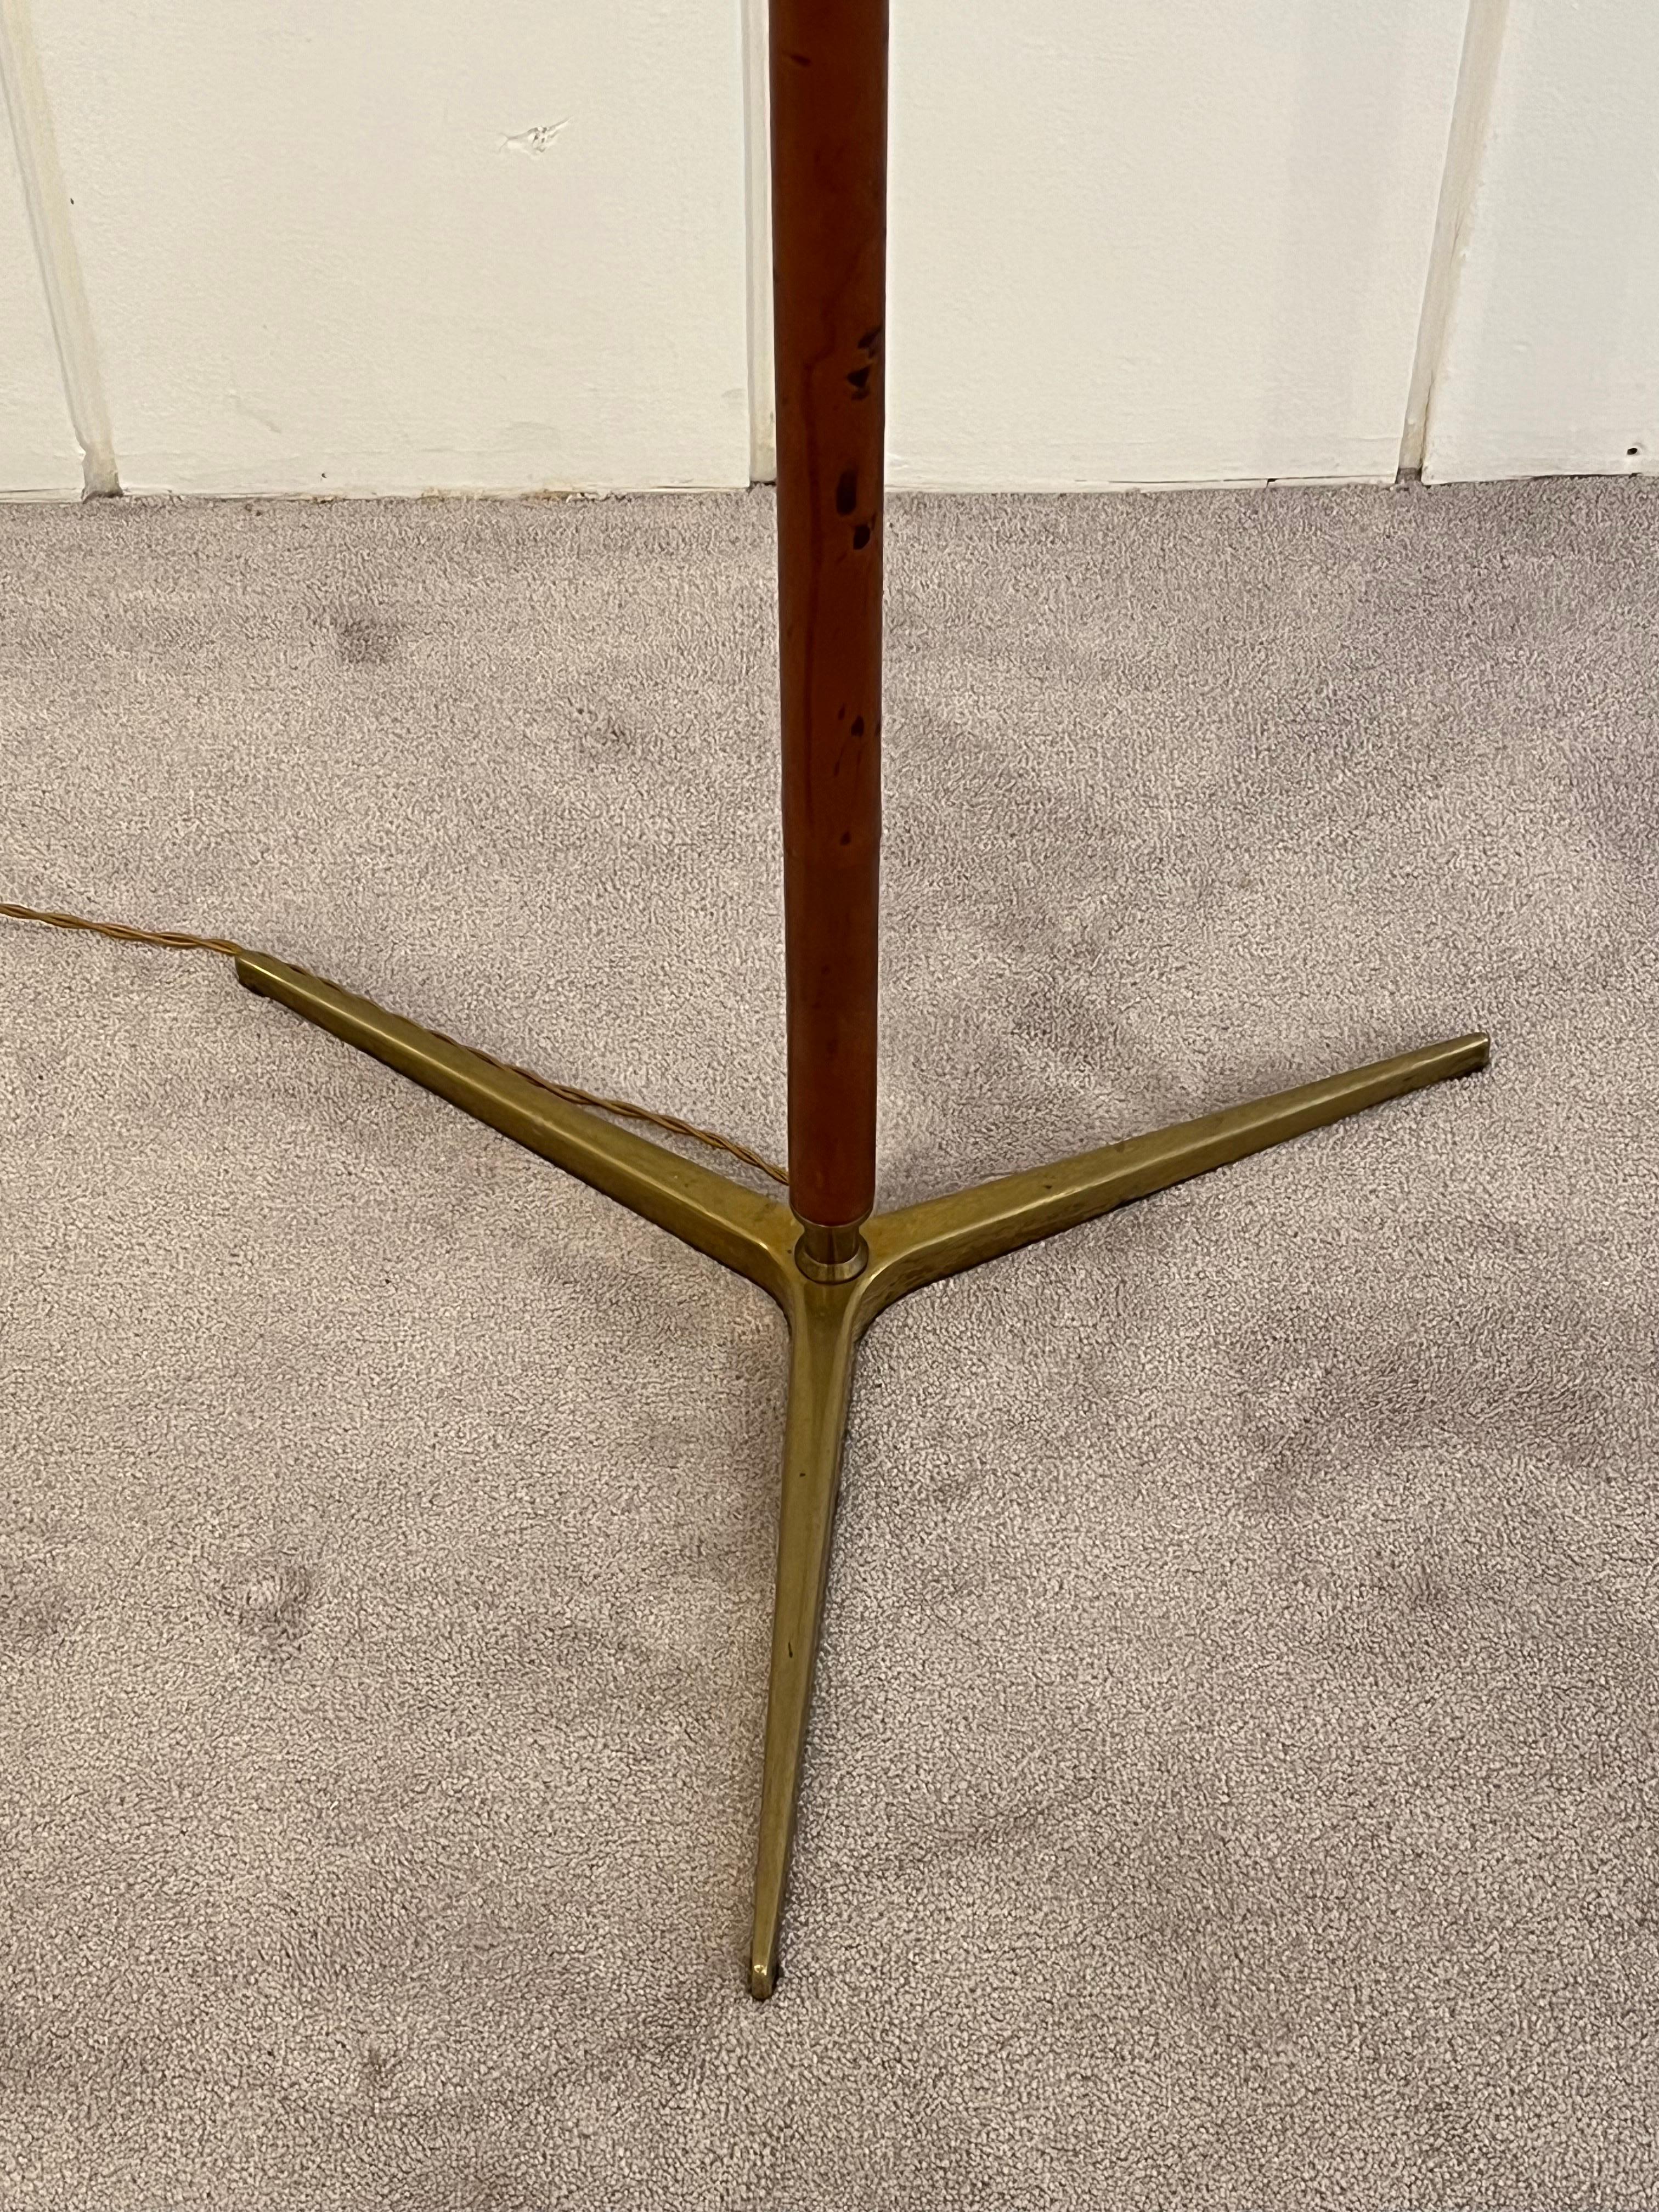 Midcentury Italian tubular brass and wrapped in leather tripod floor lamp
Designed by Gino Sarfatti 
circa 1946/48
Brand New Shade 
Original condition.